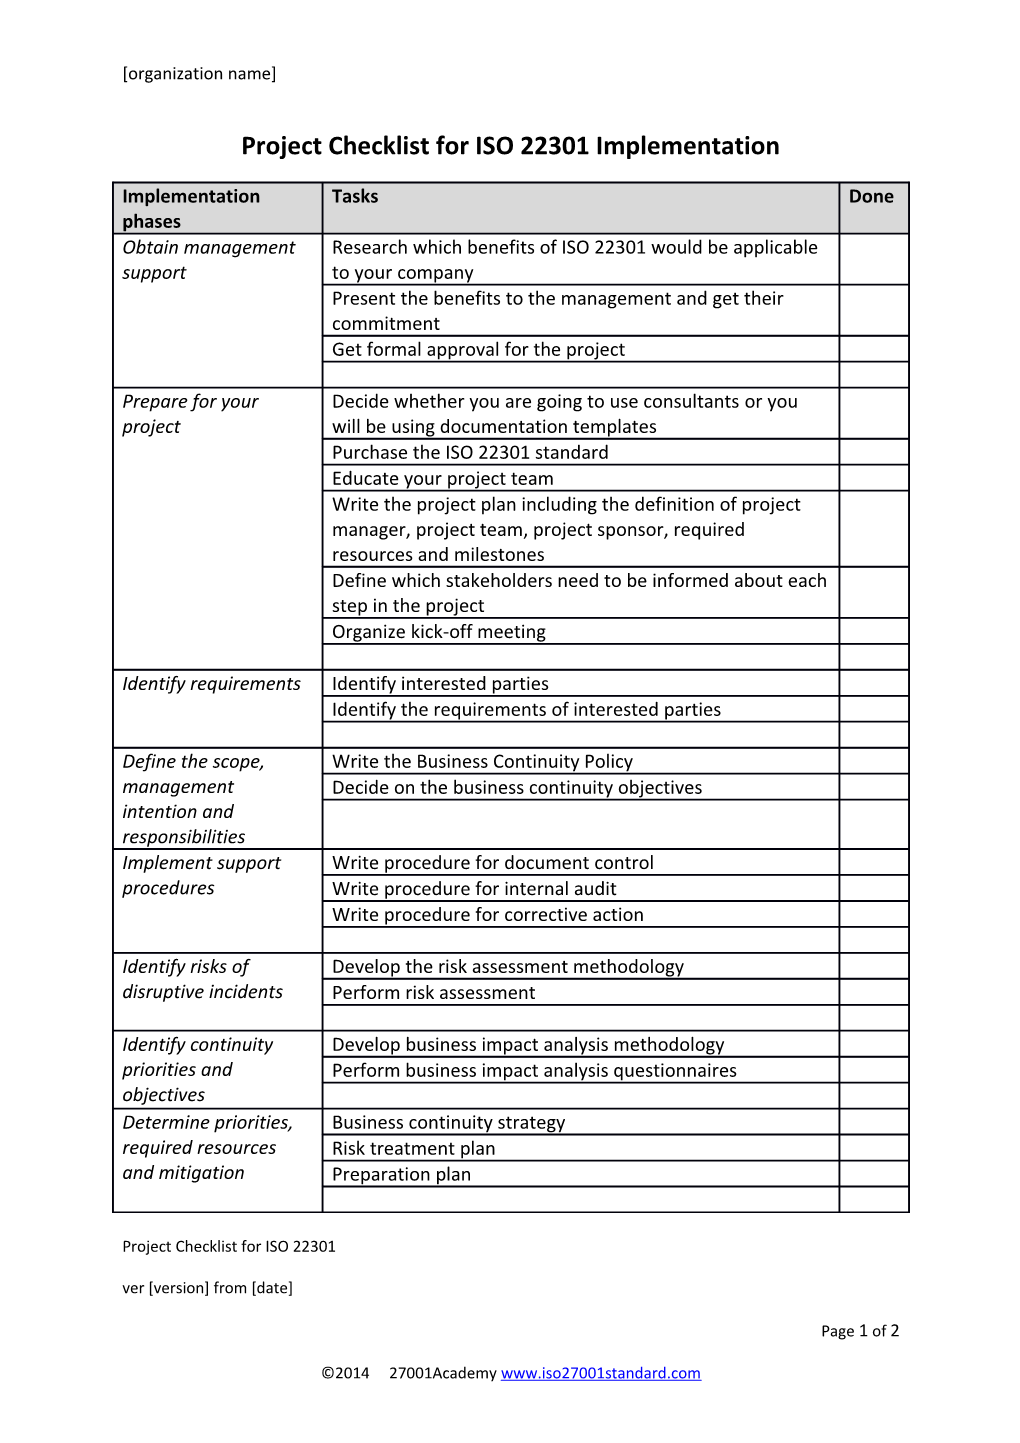 Project Checklist for ISO 22301 Implementation